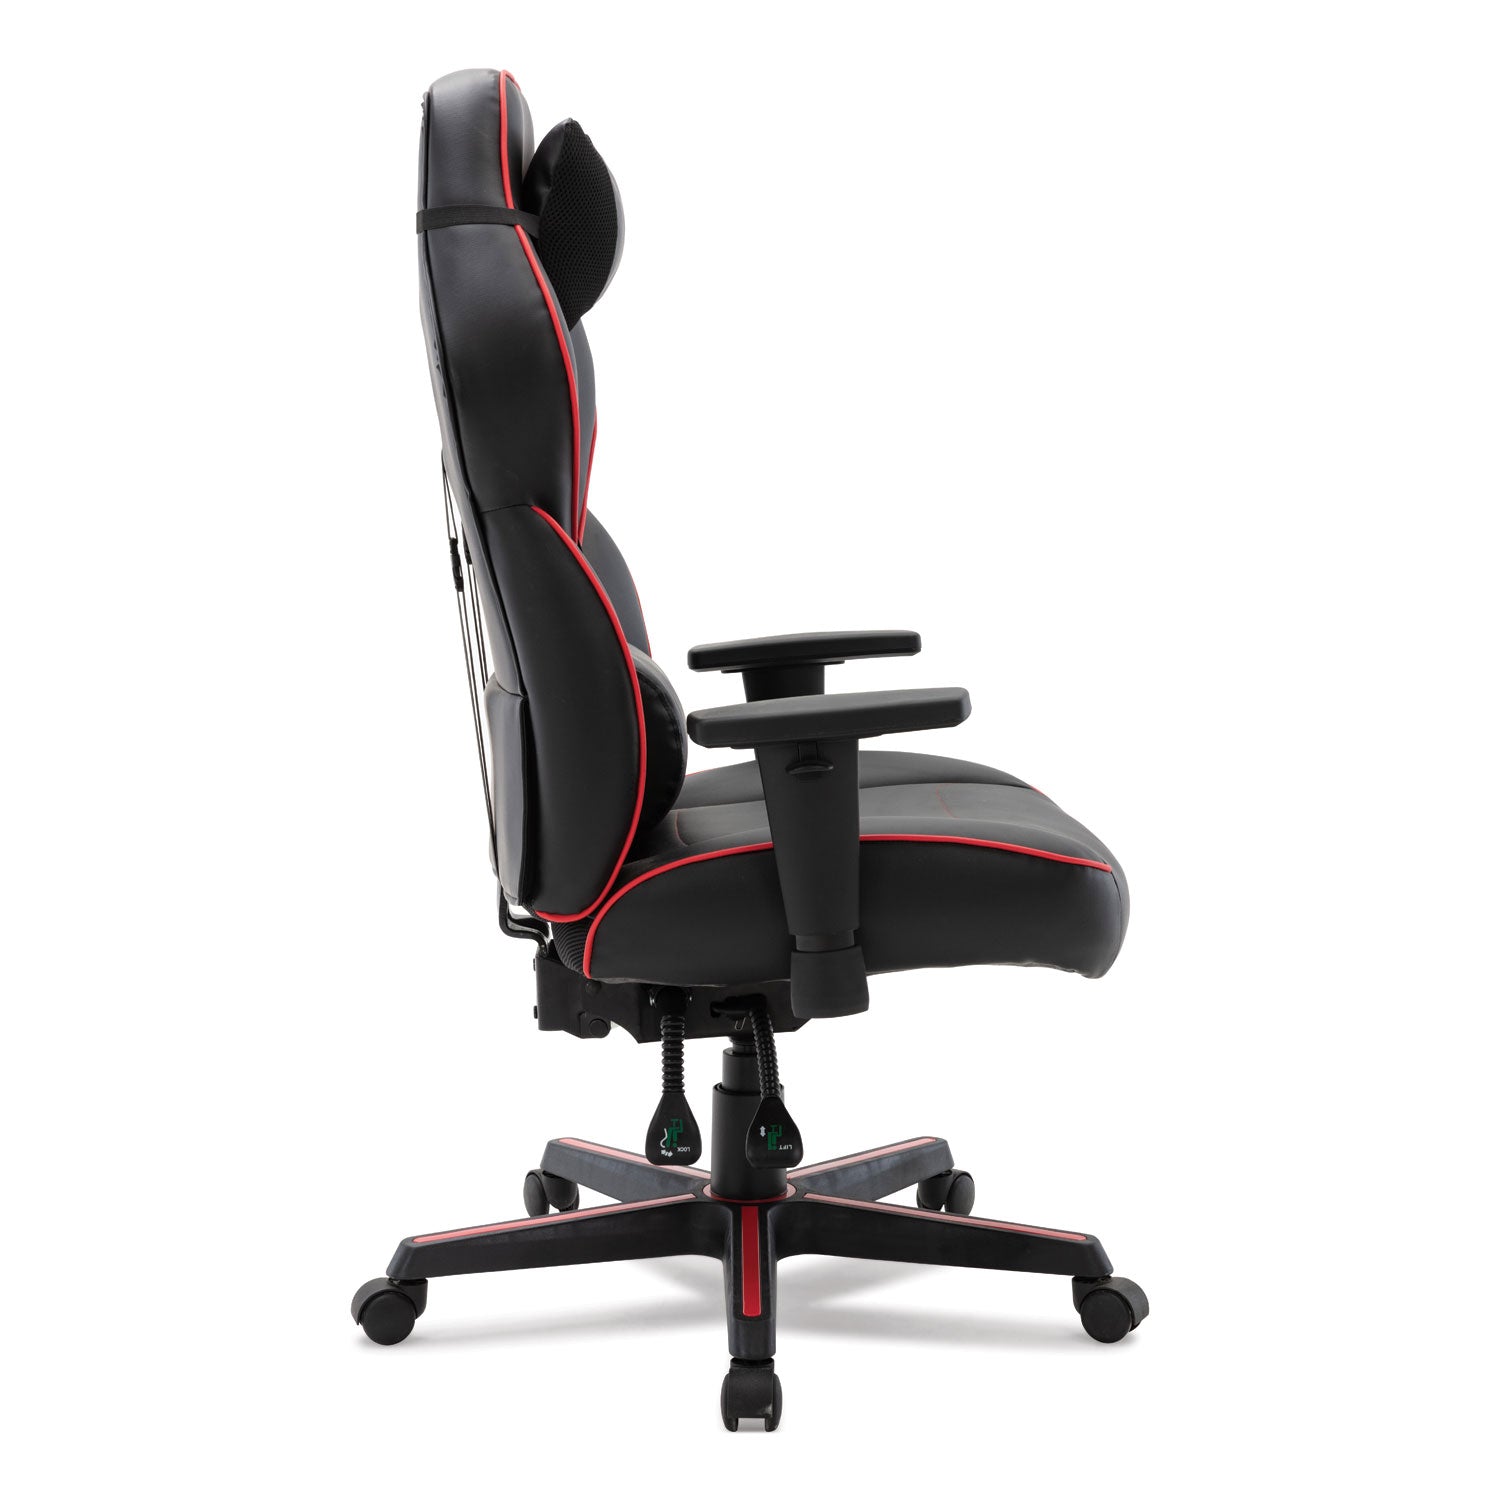 racing-style-ergonomic-gaming-chair-supports-275-lb-1591-to-198-seat-height-black-red-trim-seat-back-black-red-base_alegm4136 - 2